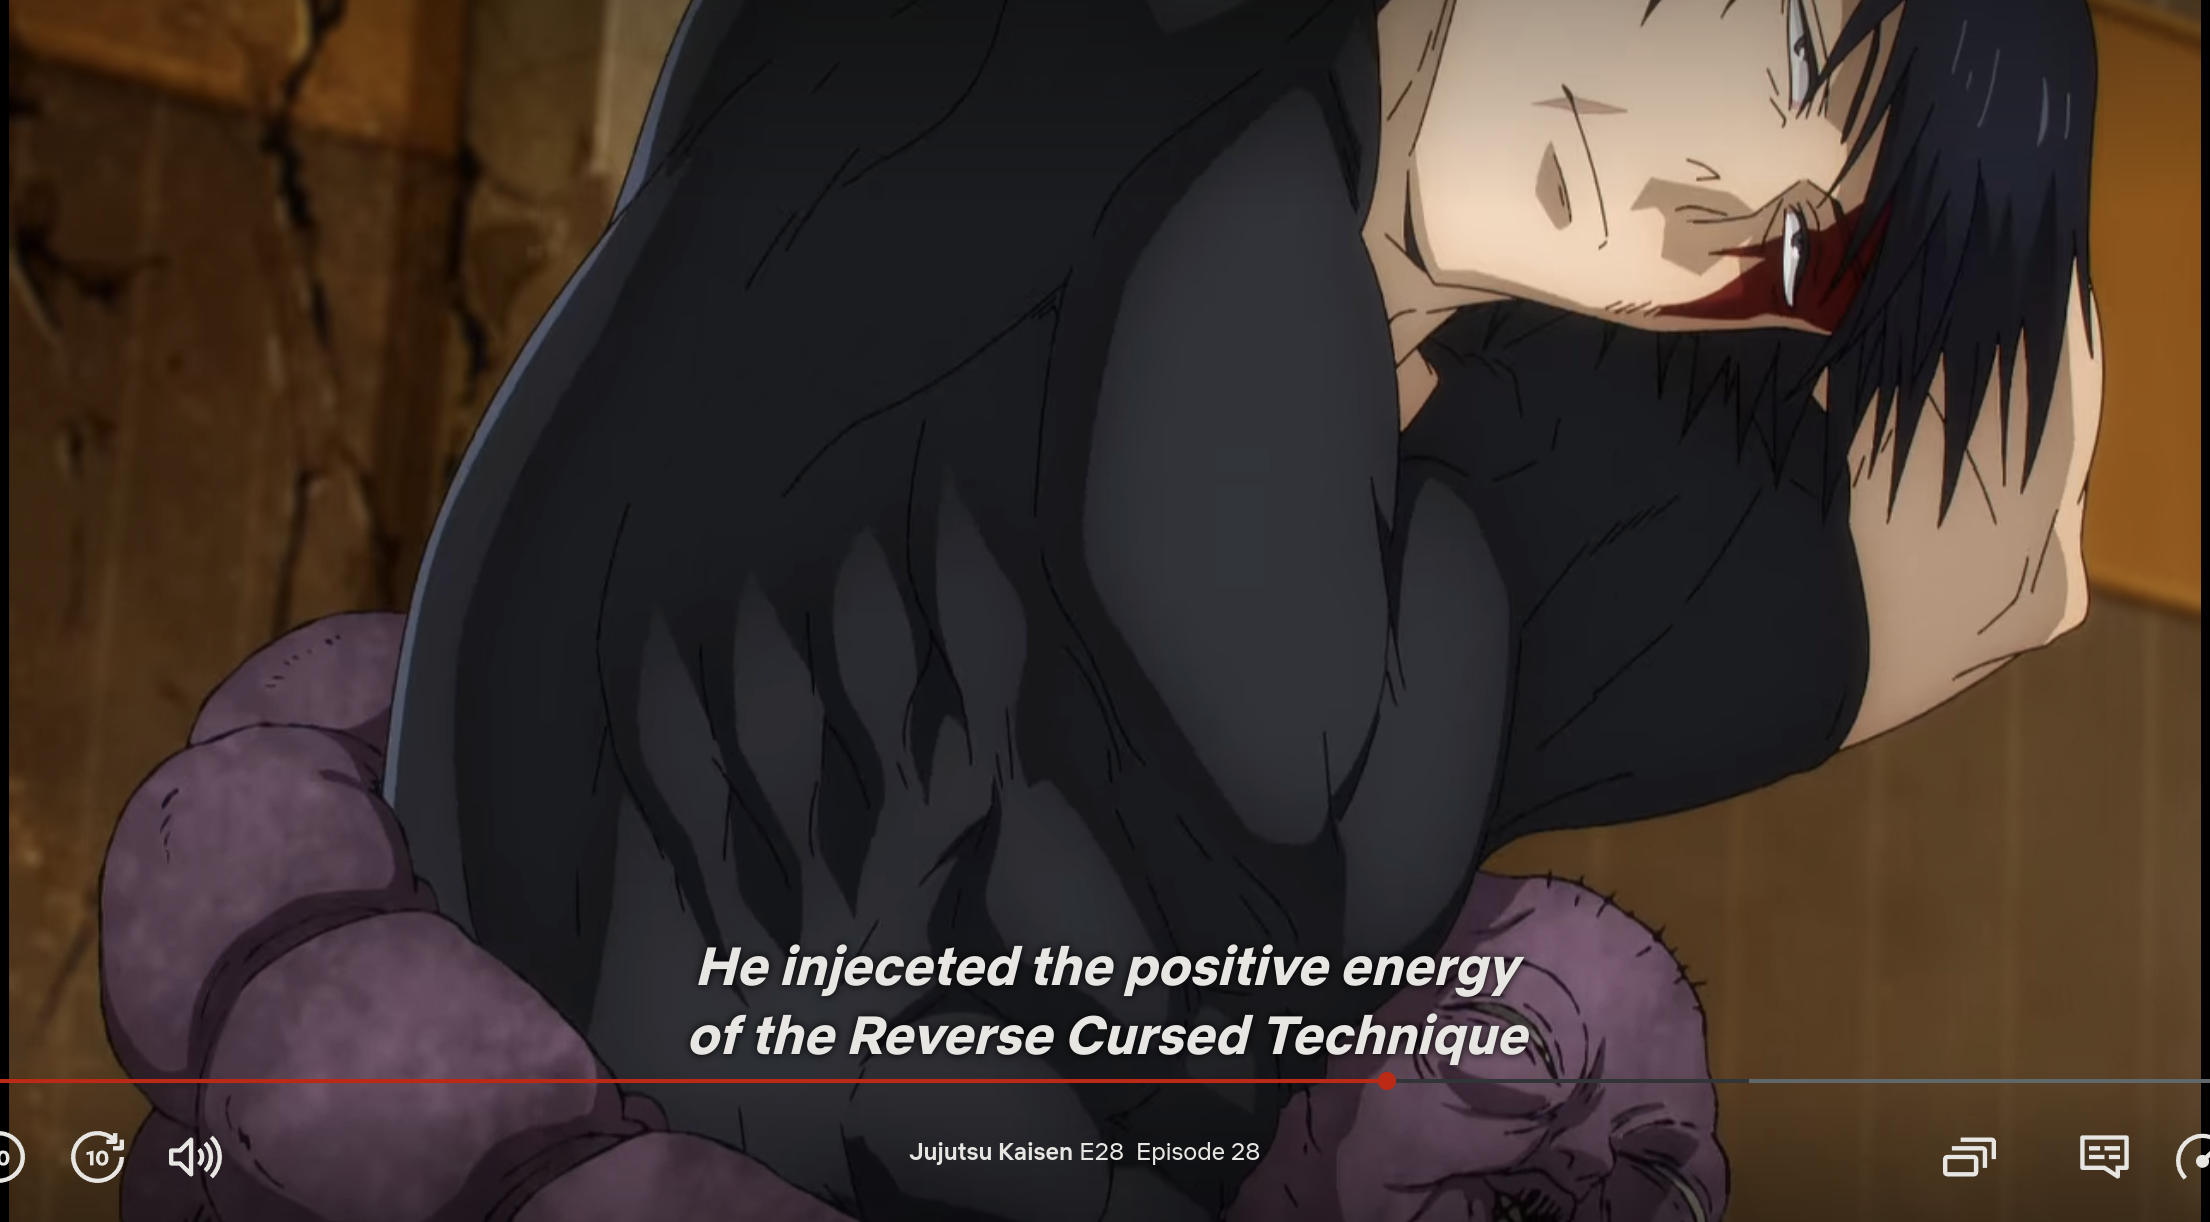 Screenshot of Jujutsu Kaisen episode 28. Tōji Fushiguro stretching his muscles. Subtitle: "He injeceted (sic) the positive energy of the Reverse Cursed Technique"